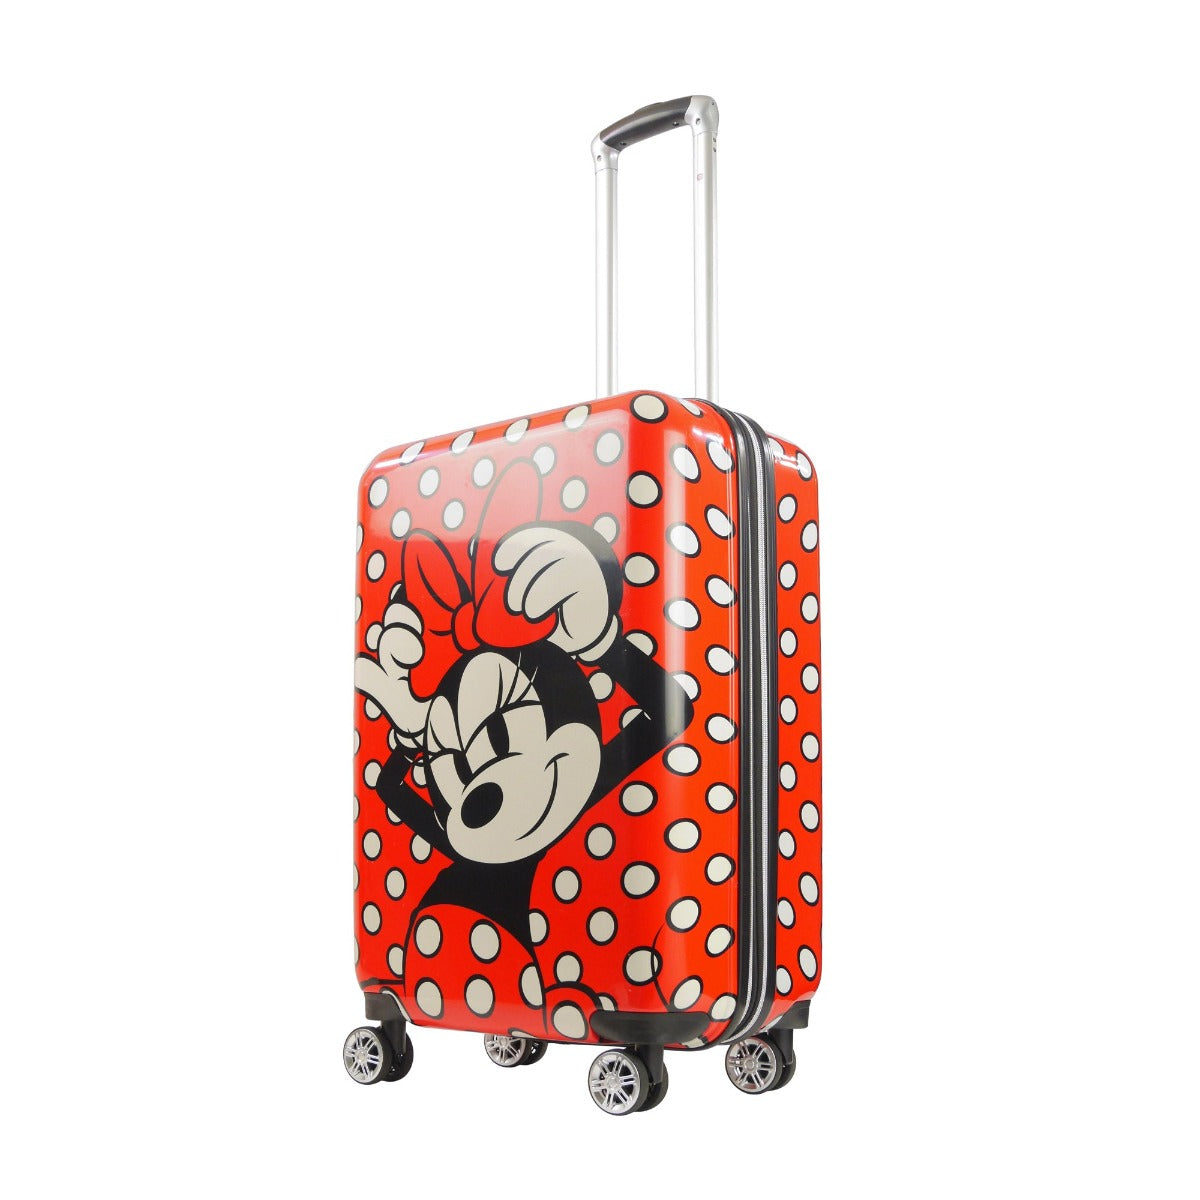 Disney Minnie Mouse Polka Dot II 21.5" Carry-on Red Spinner Suitcase Luggage